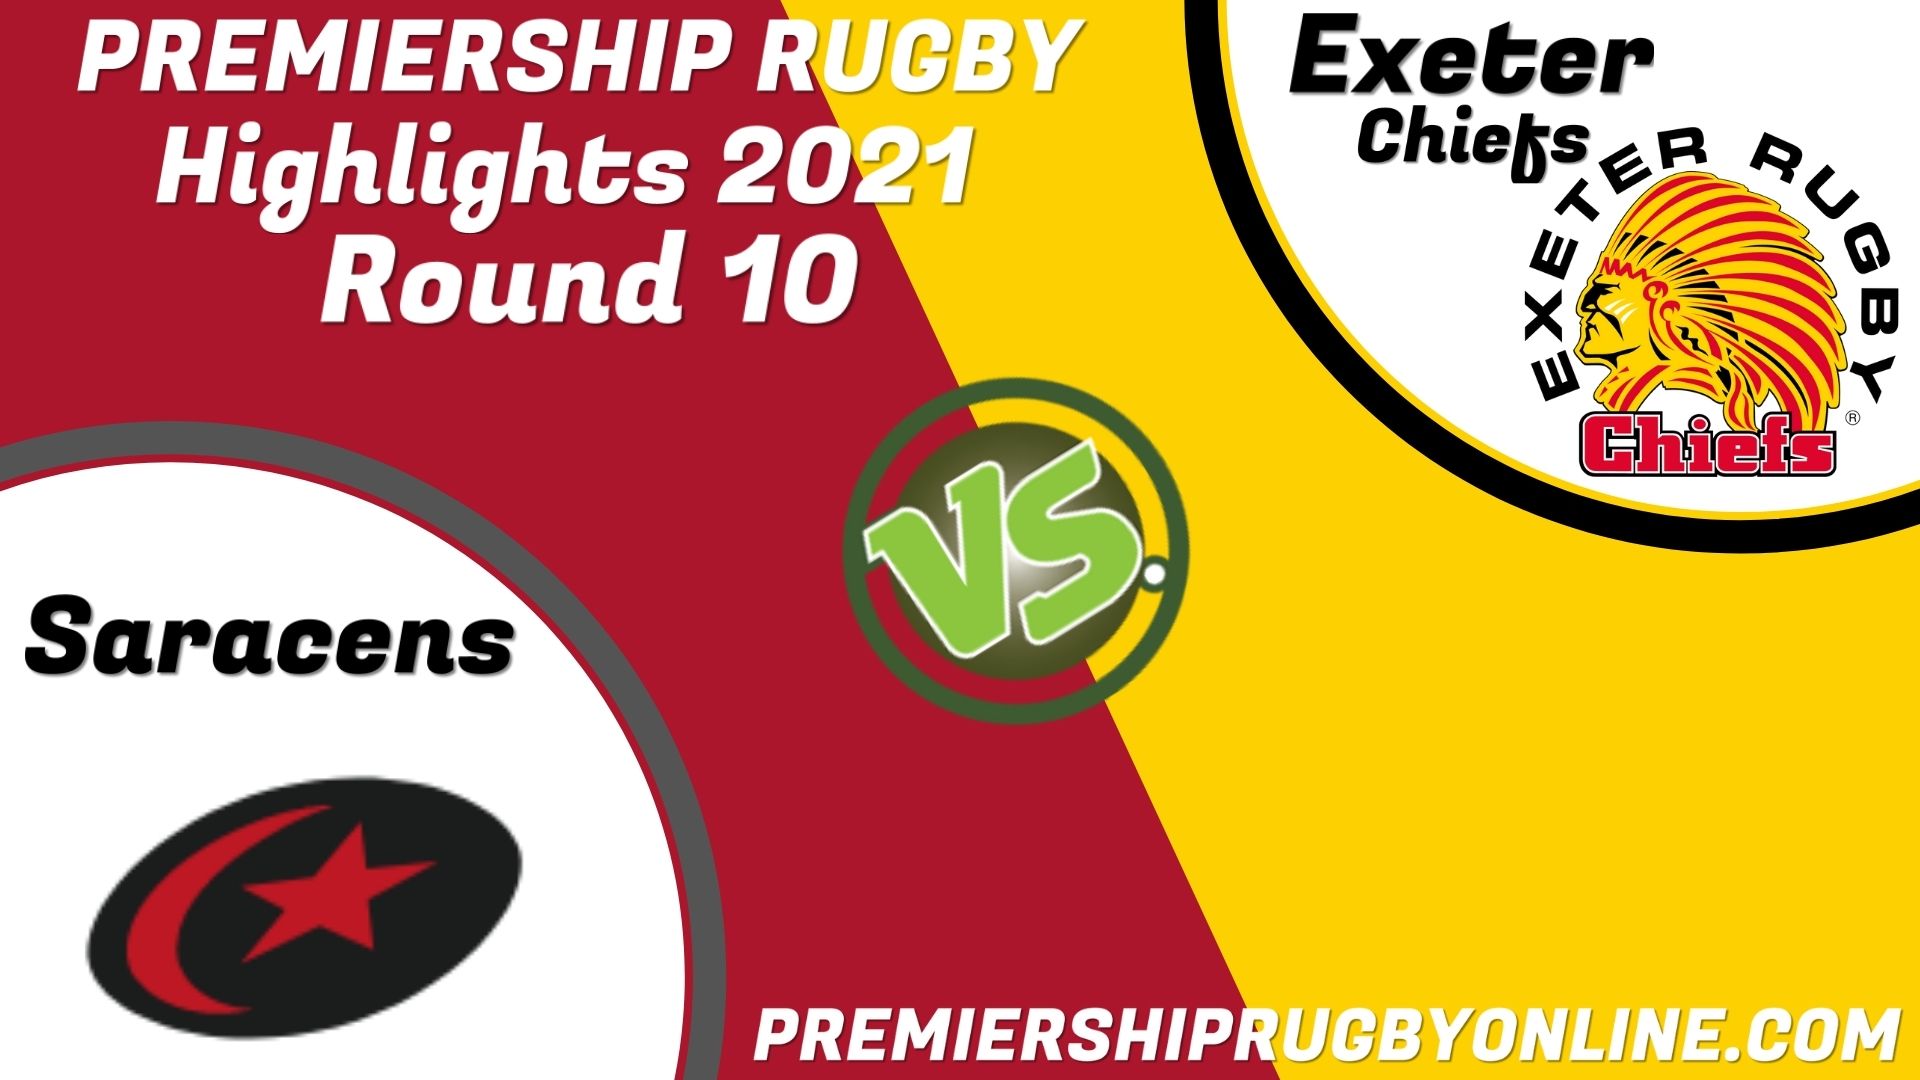 Exeter Chiefs Vs Saracens Highlights 2021 RD 10